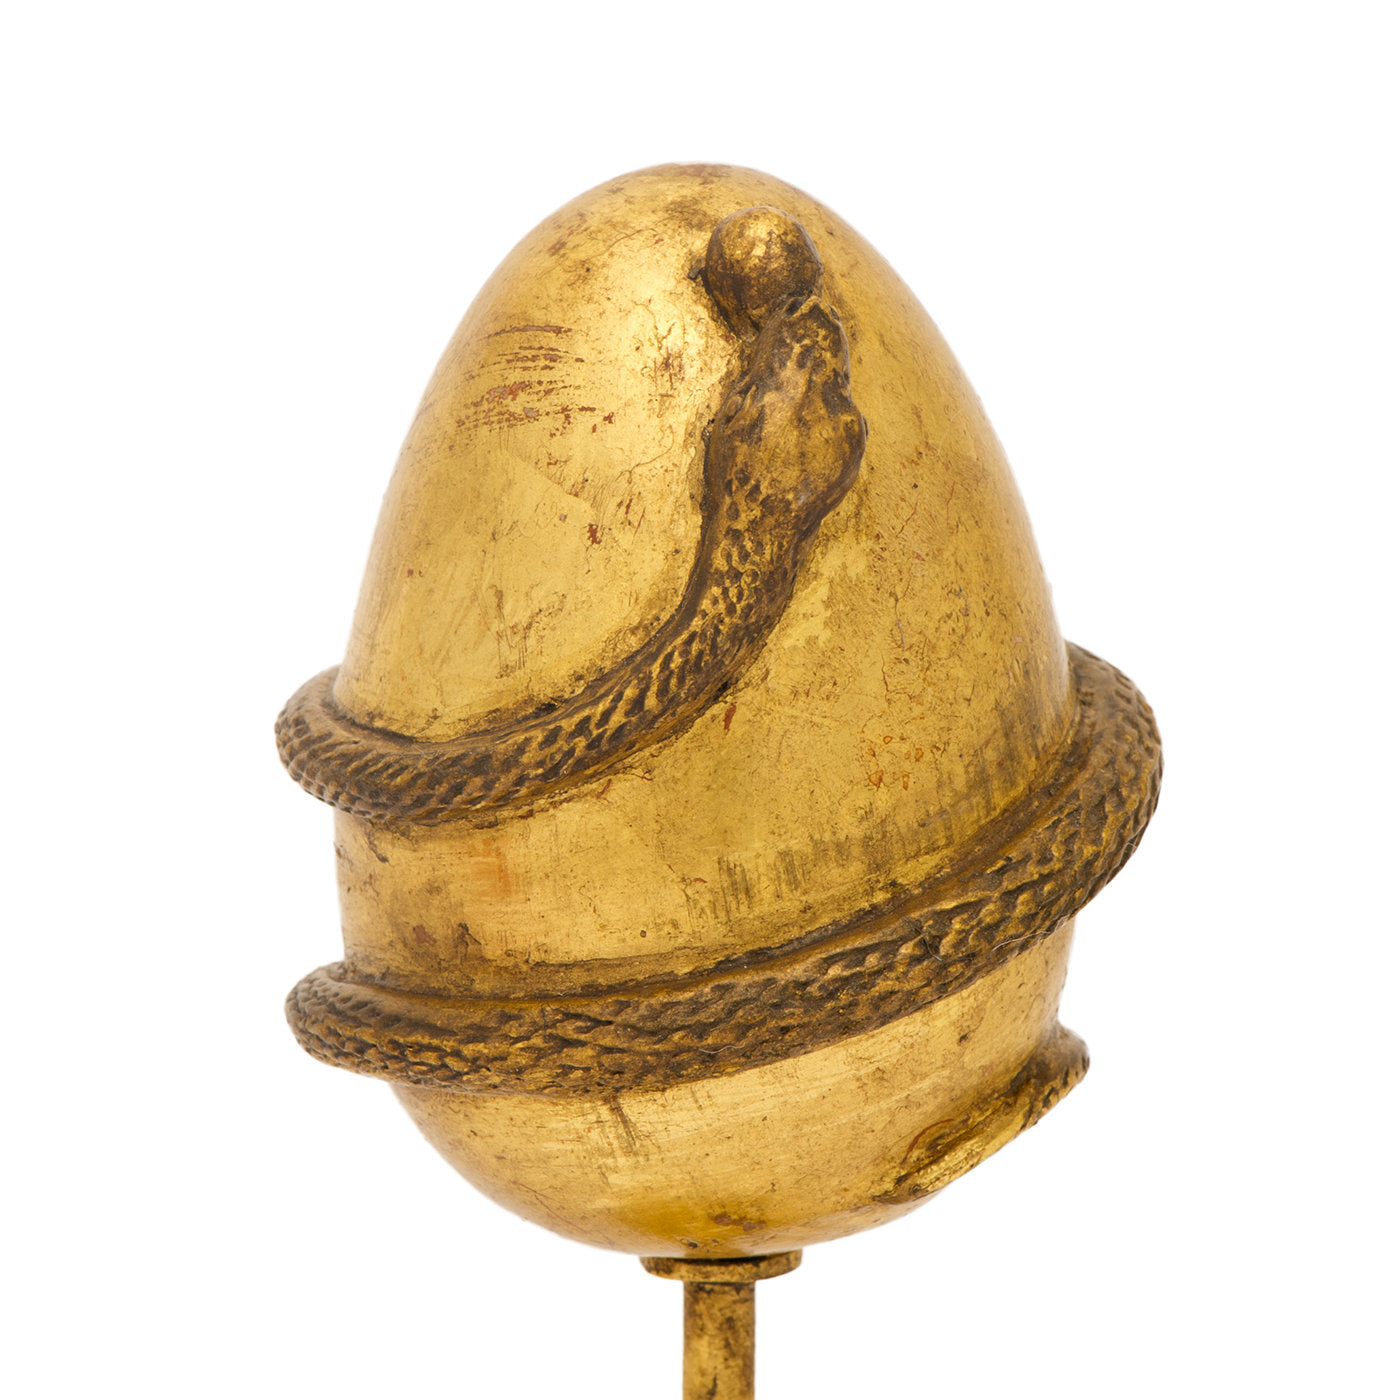 Partenope Egg N°5 Gold Small Sculpture - Alternative view 1